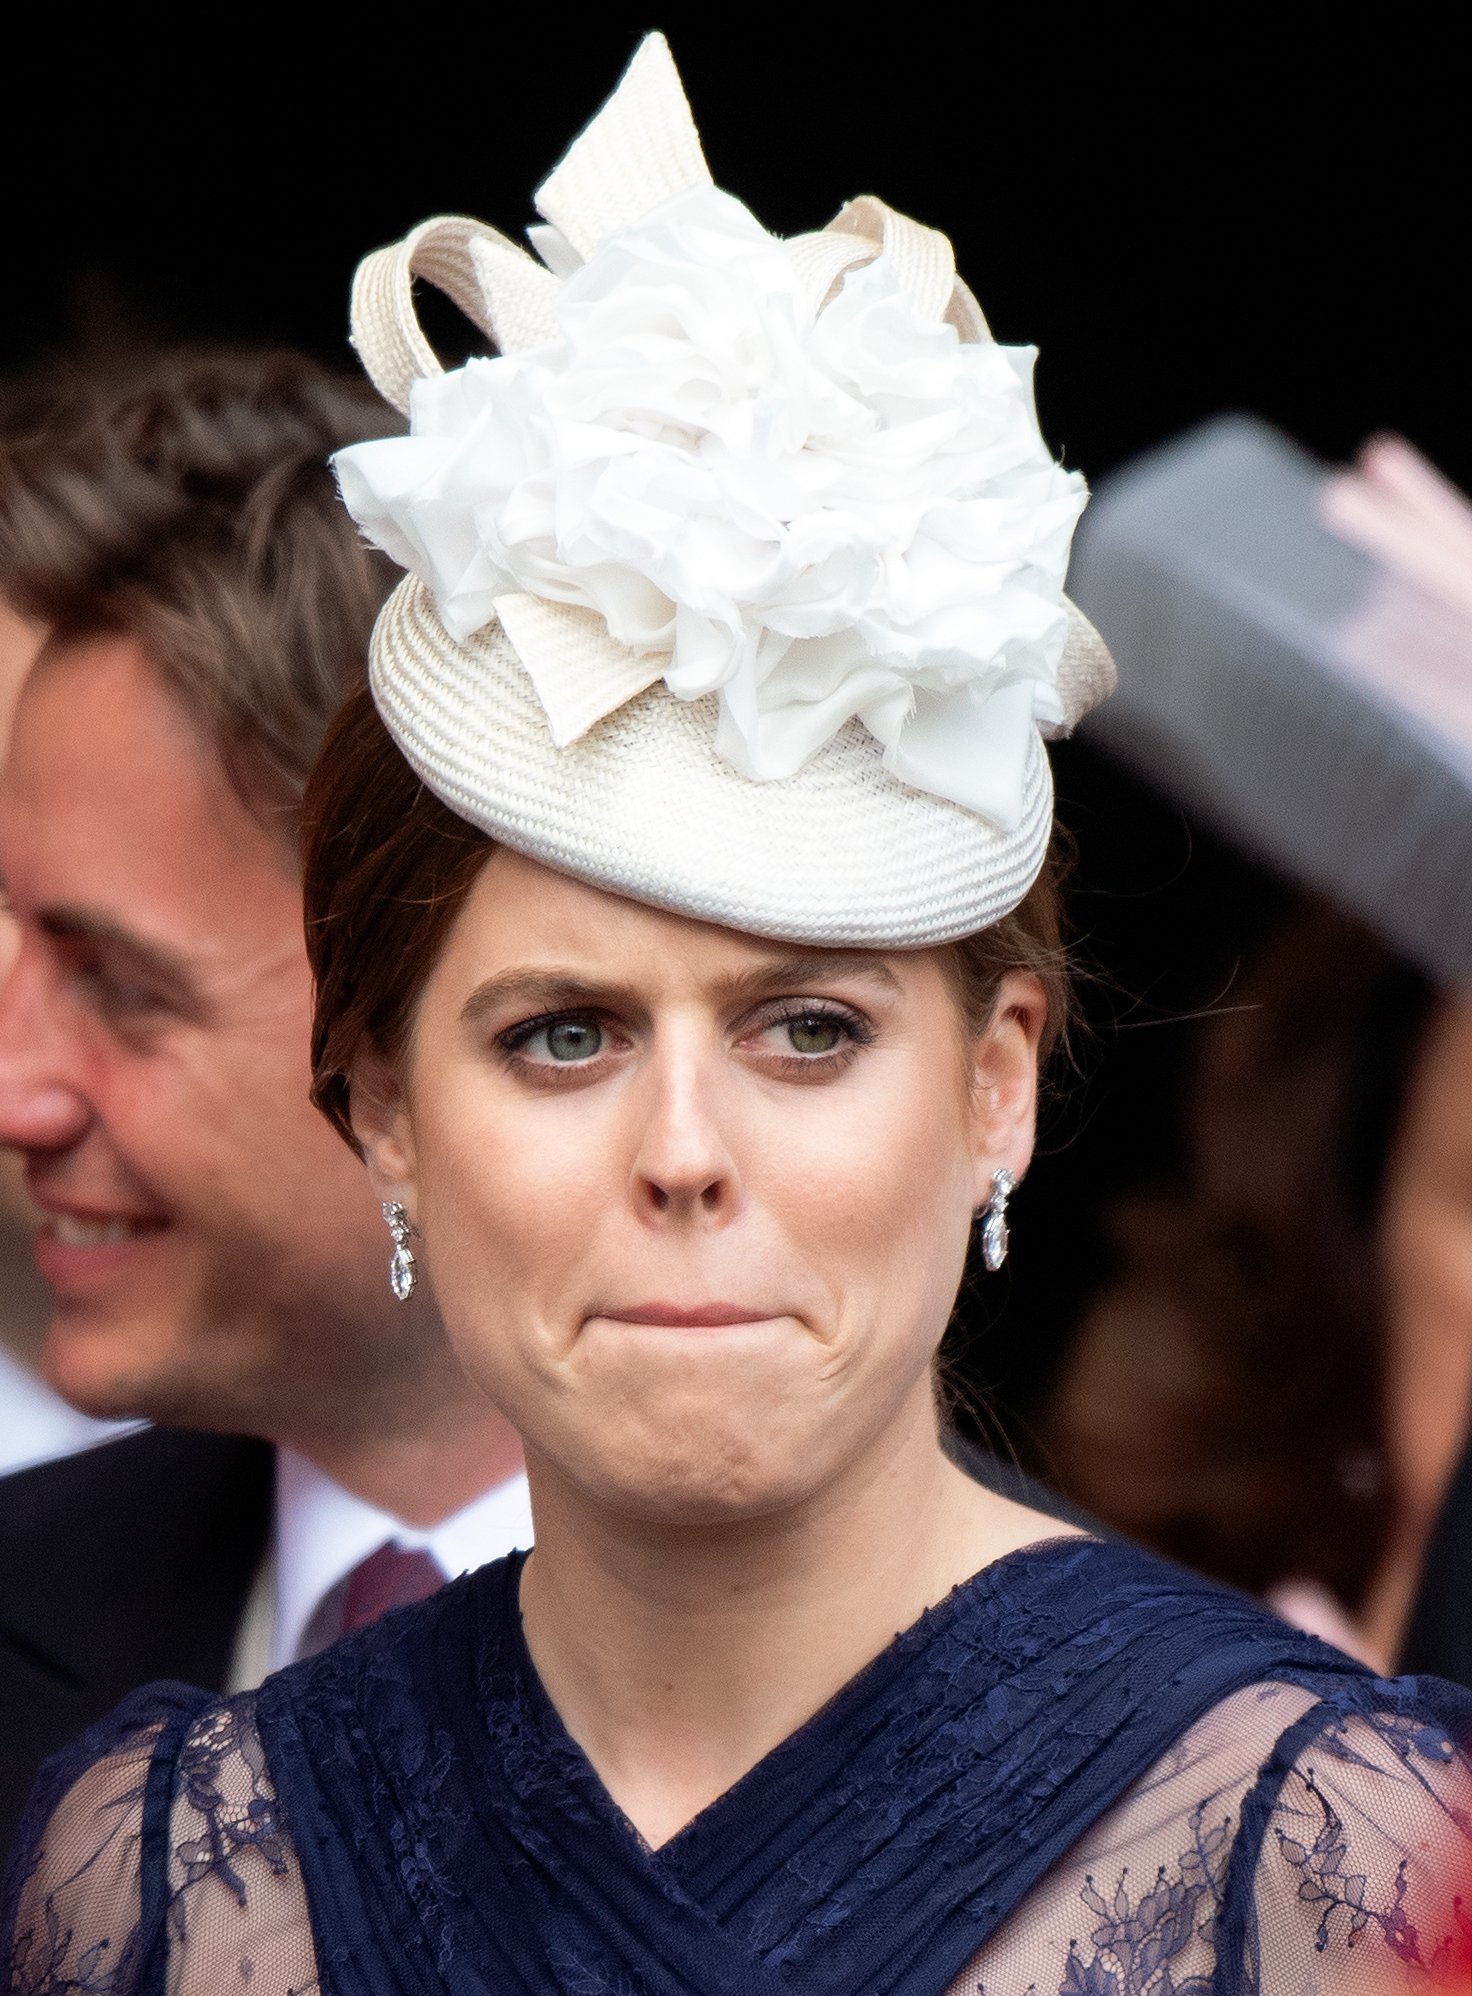 Princess Beatrice attends the wedding of Lady Gabriella Windsor and Thomas Kingston at St George's Chapel on May 18, 2019 in Windsor, England. | Source: Getty Images